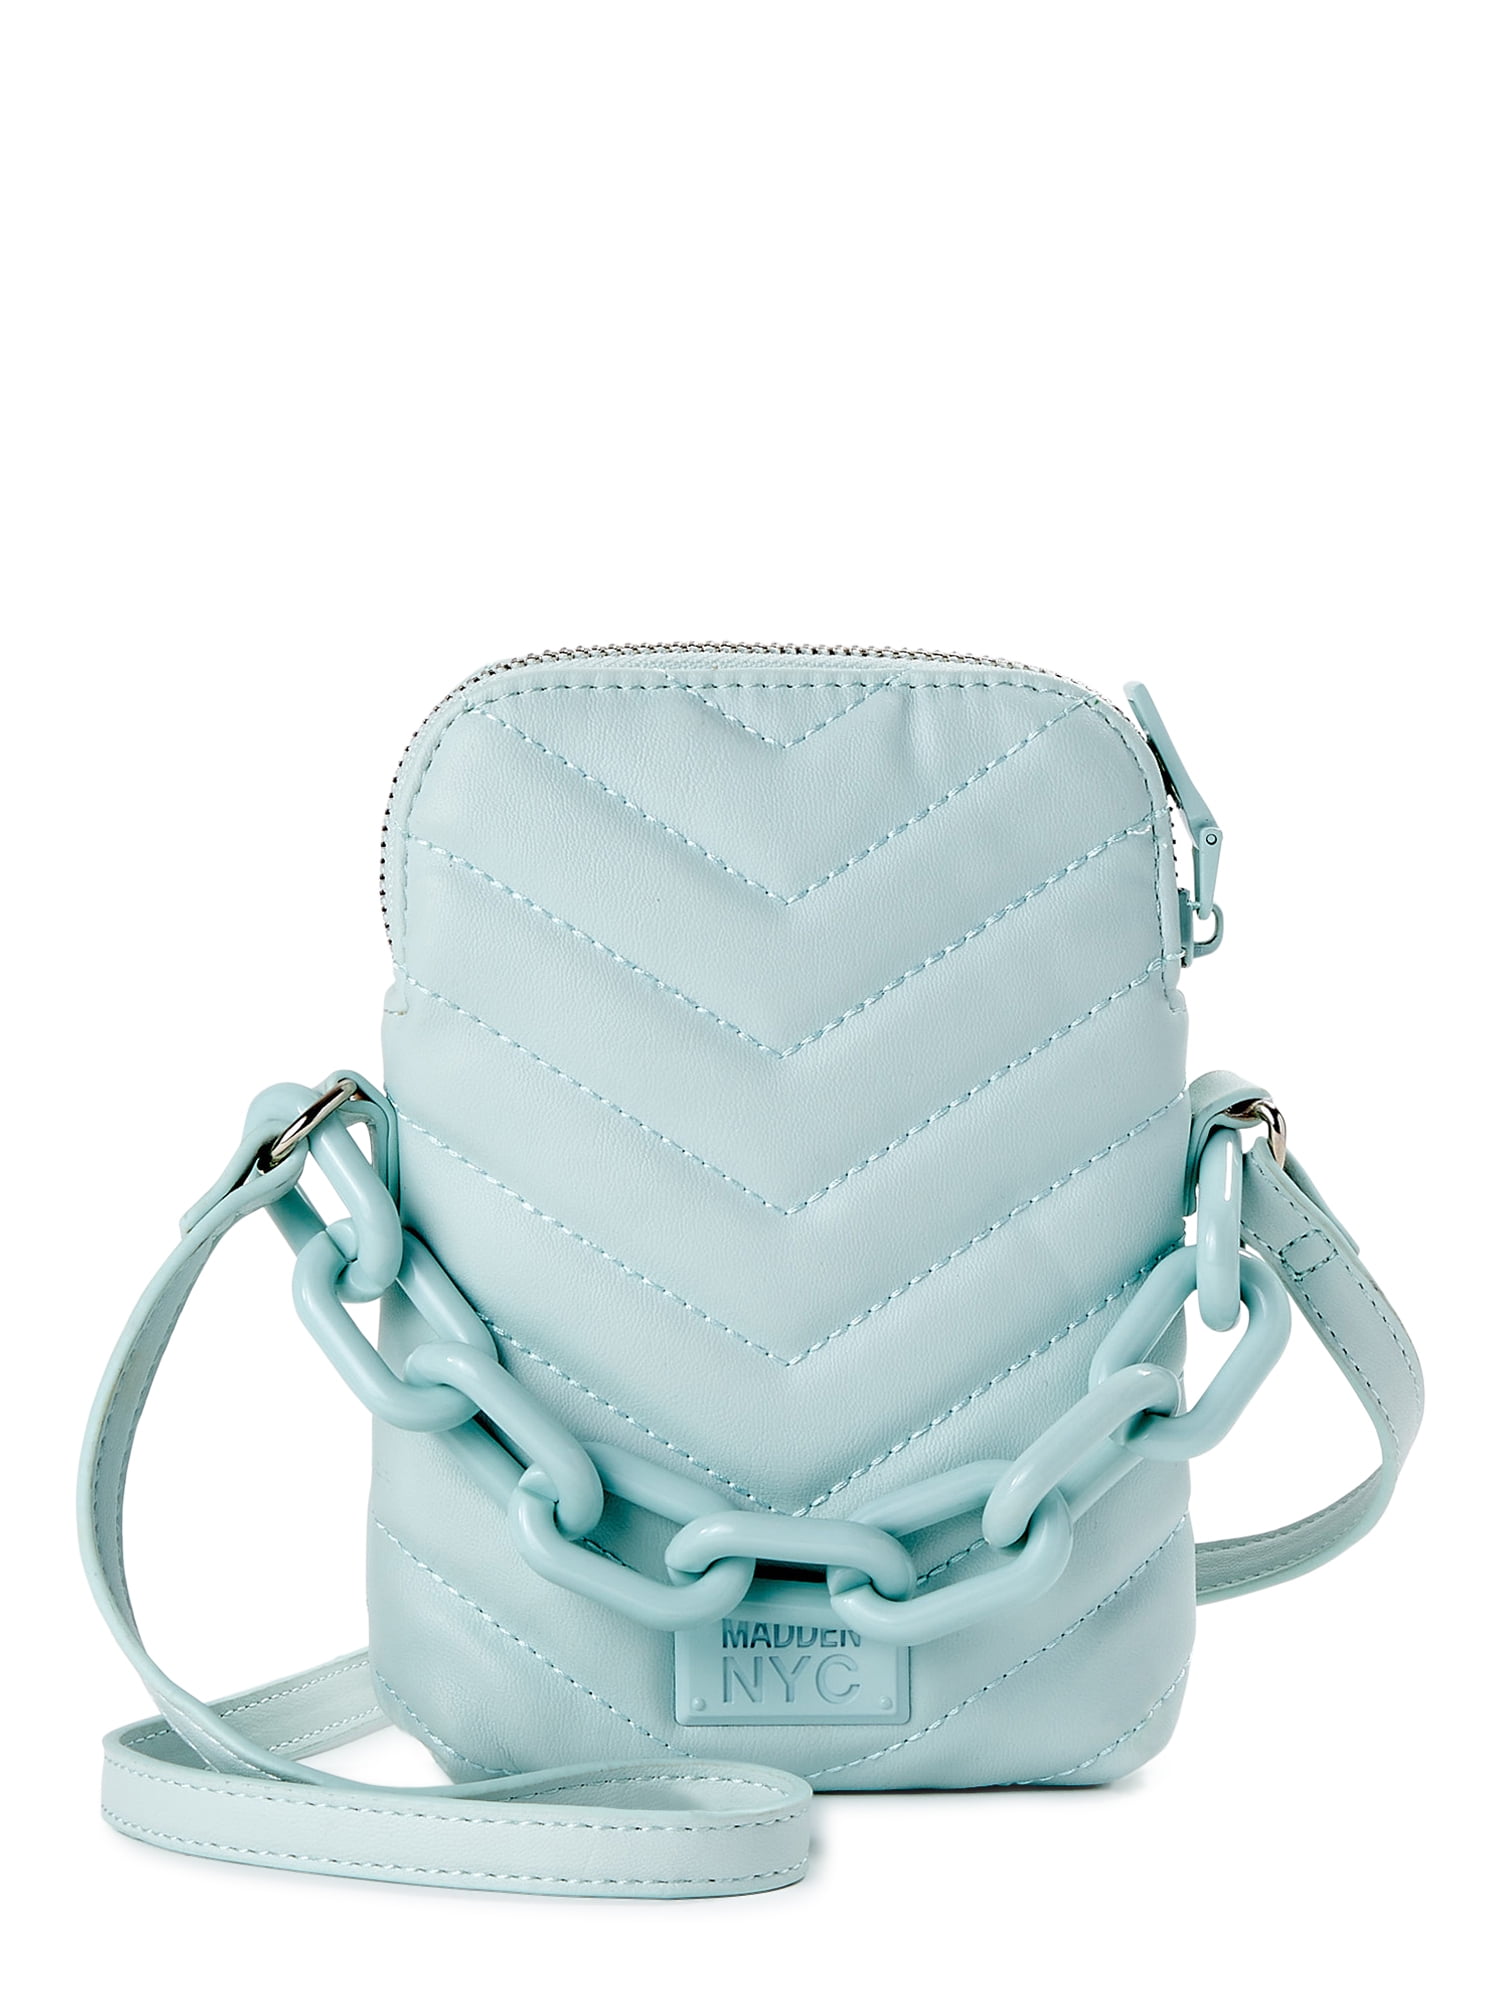 Madden NYC Women's Quilted Crossbody Bag with Pouch 